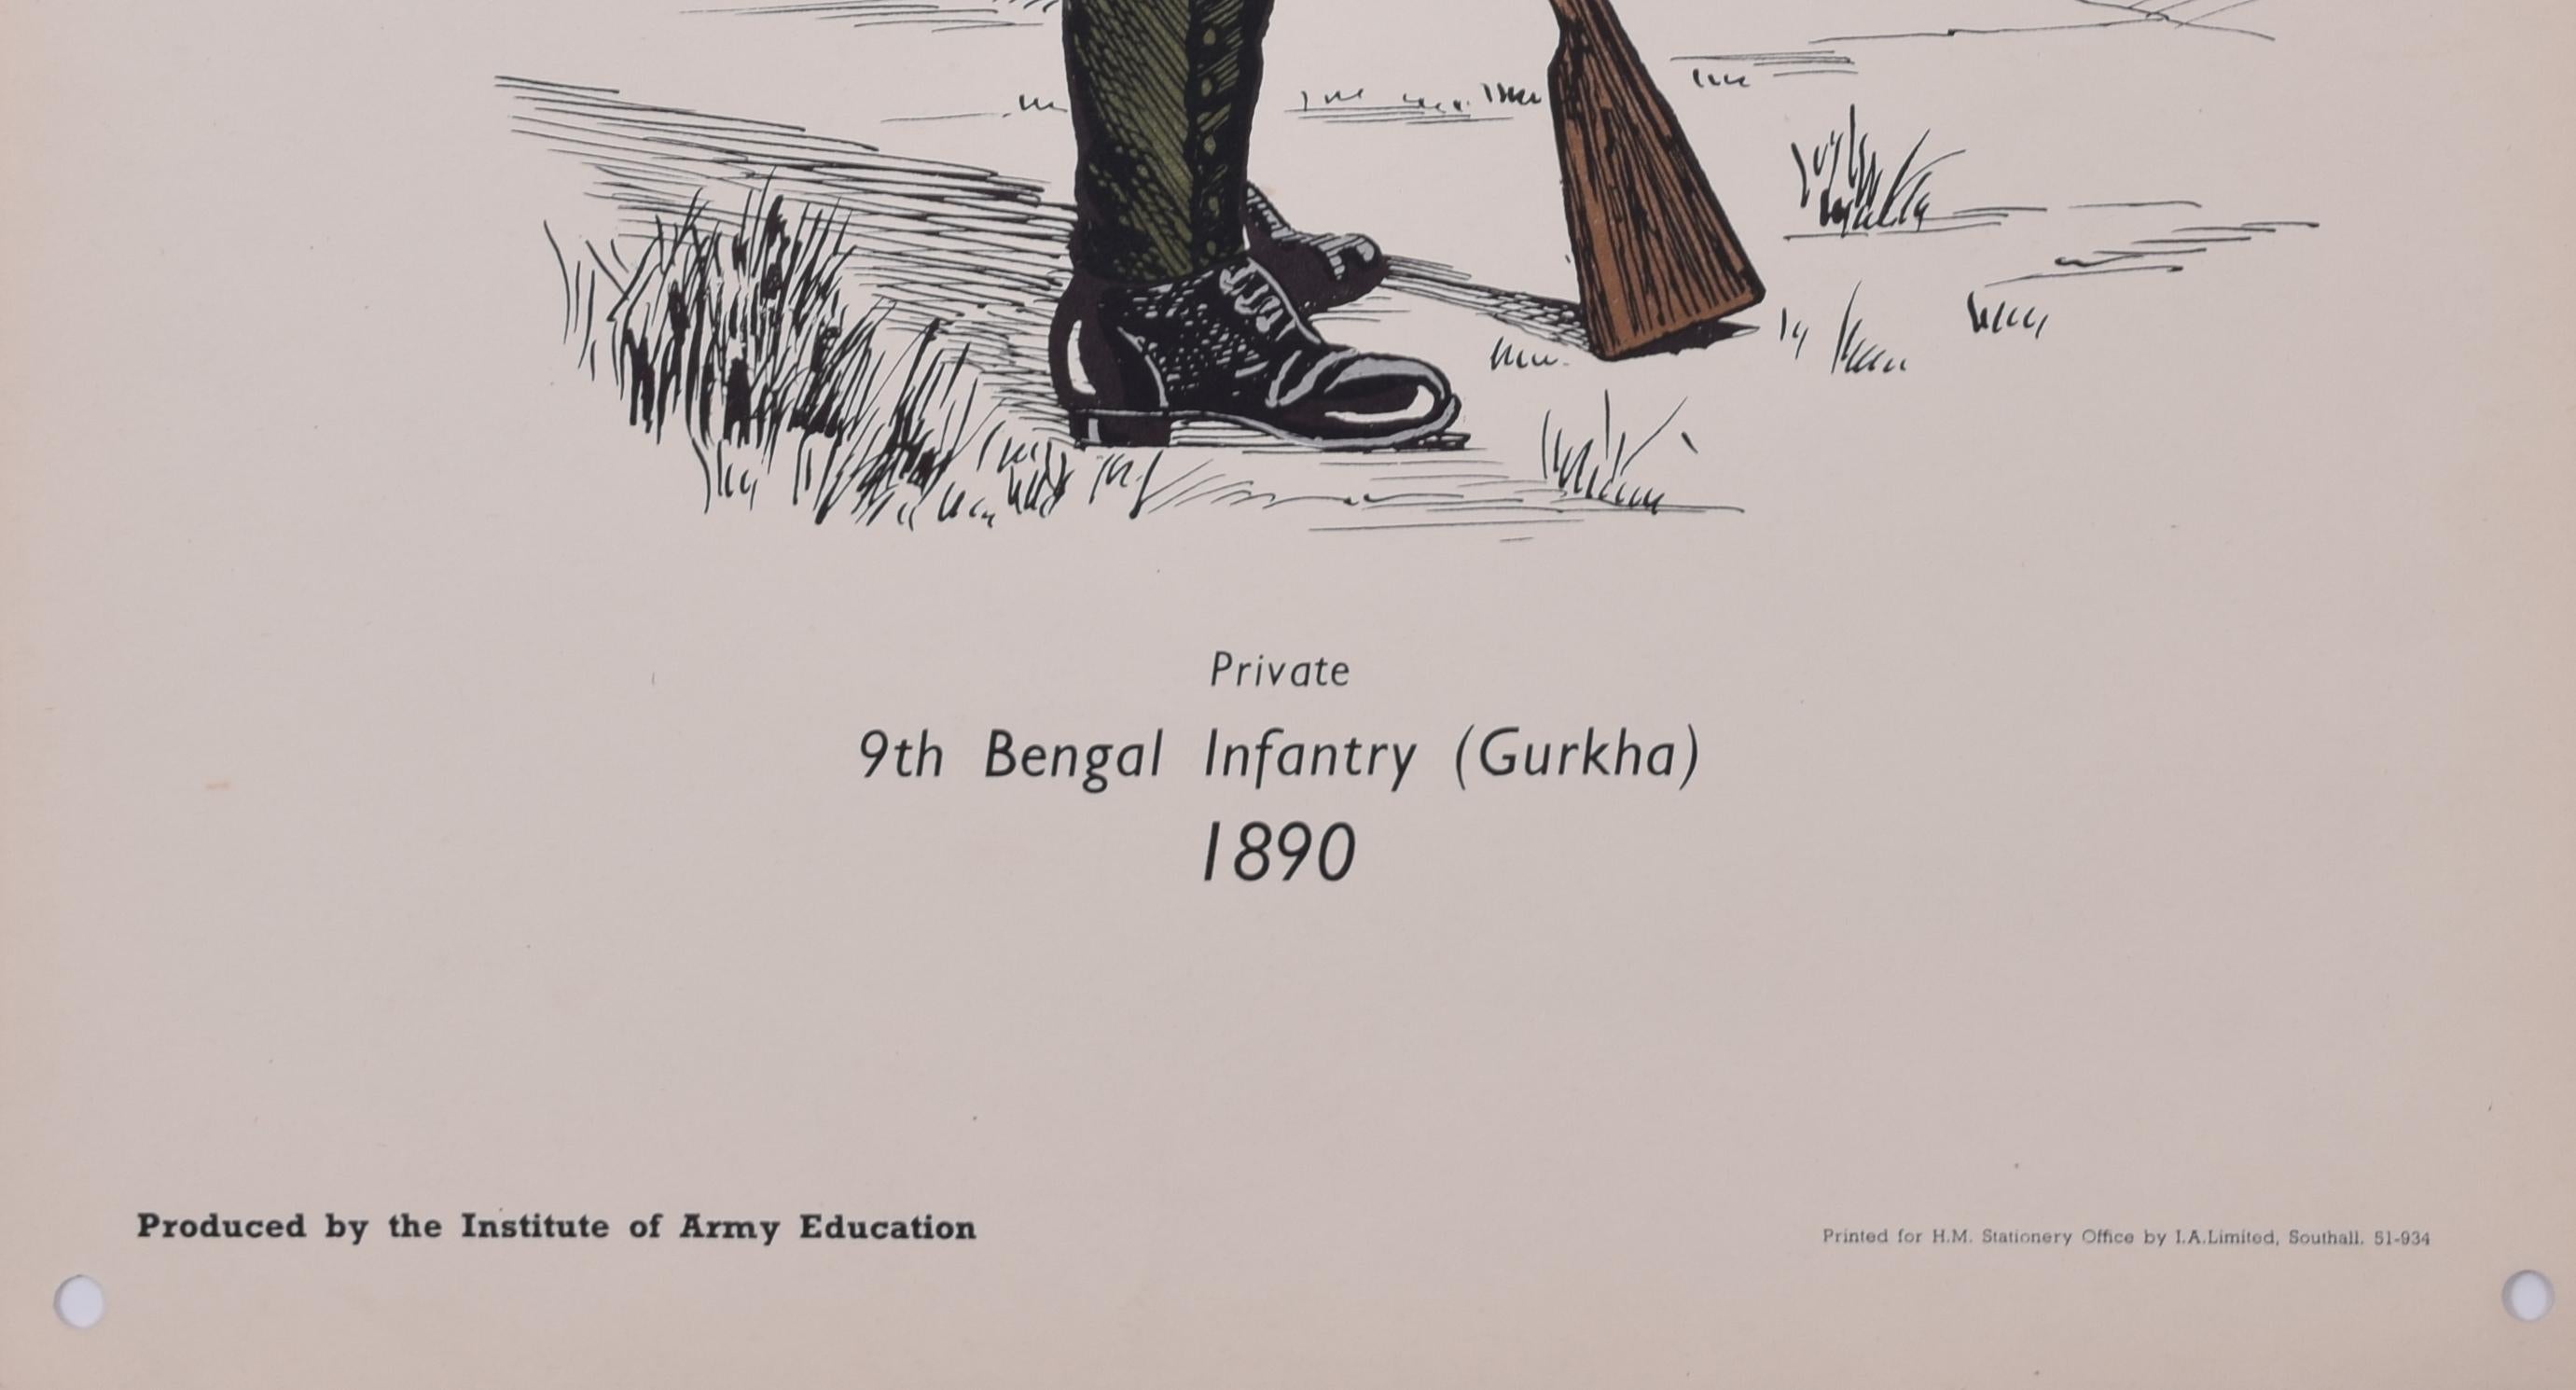 Gurkha 9th Bengal Infantry Institute of Army Education Uniform-Lithographie im Angebot 1